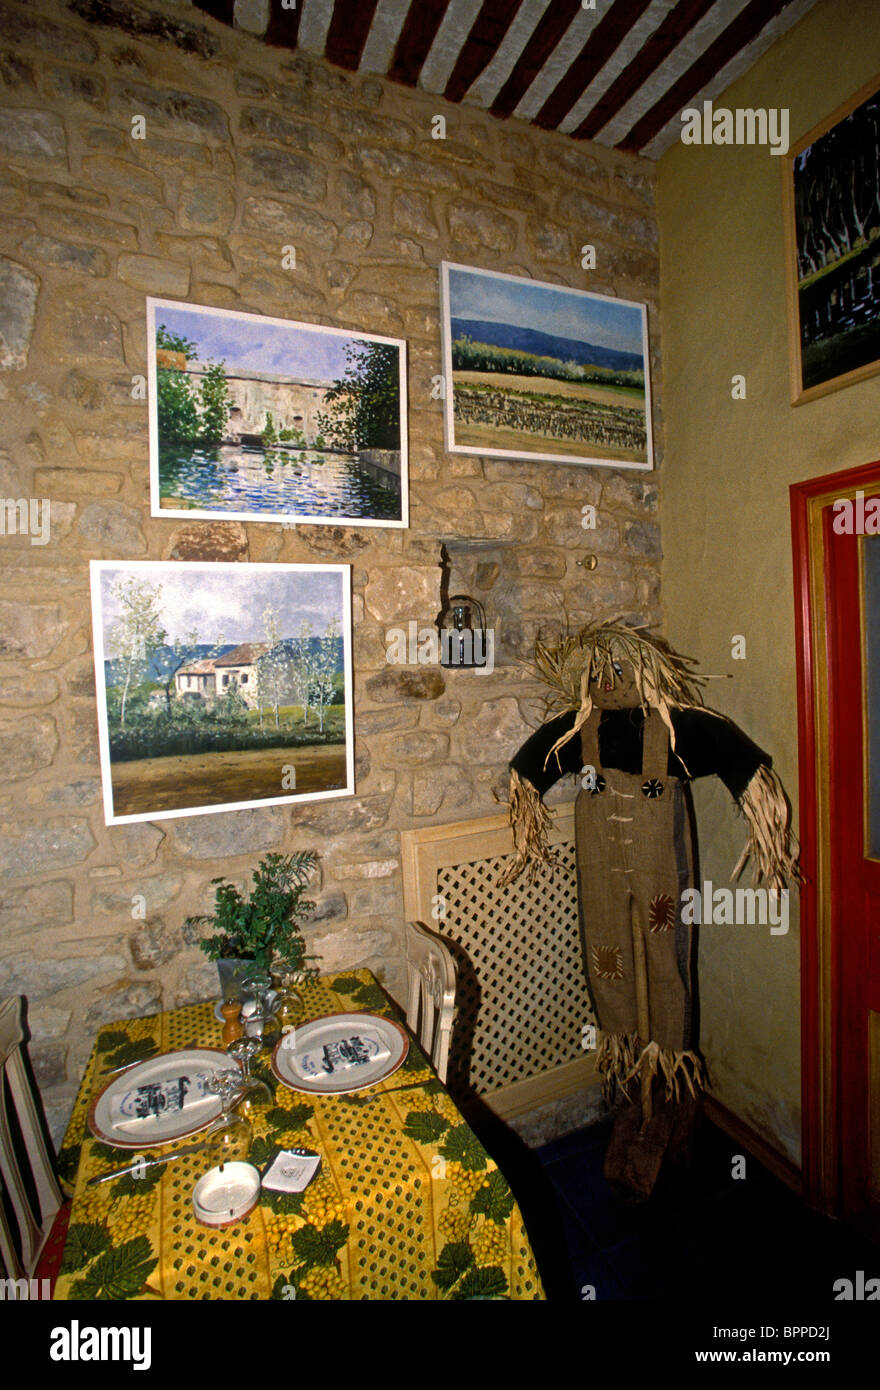 interior decoration, decor, ambiance, Le Crillon restaurant, French food and drink, French restaurant, village of Murs, Murs, Provence, France, Europe Stock Photo